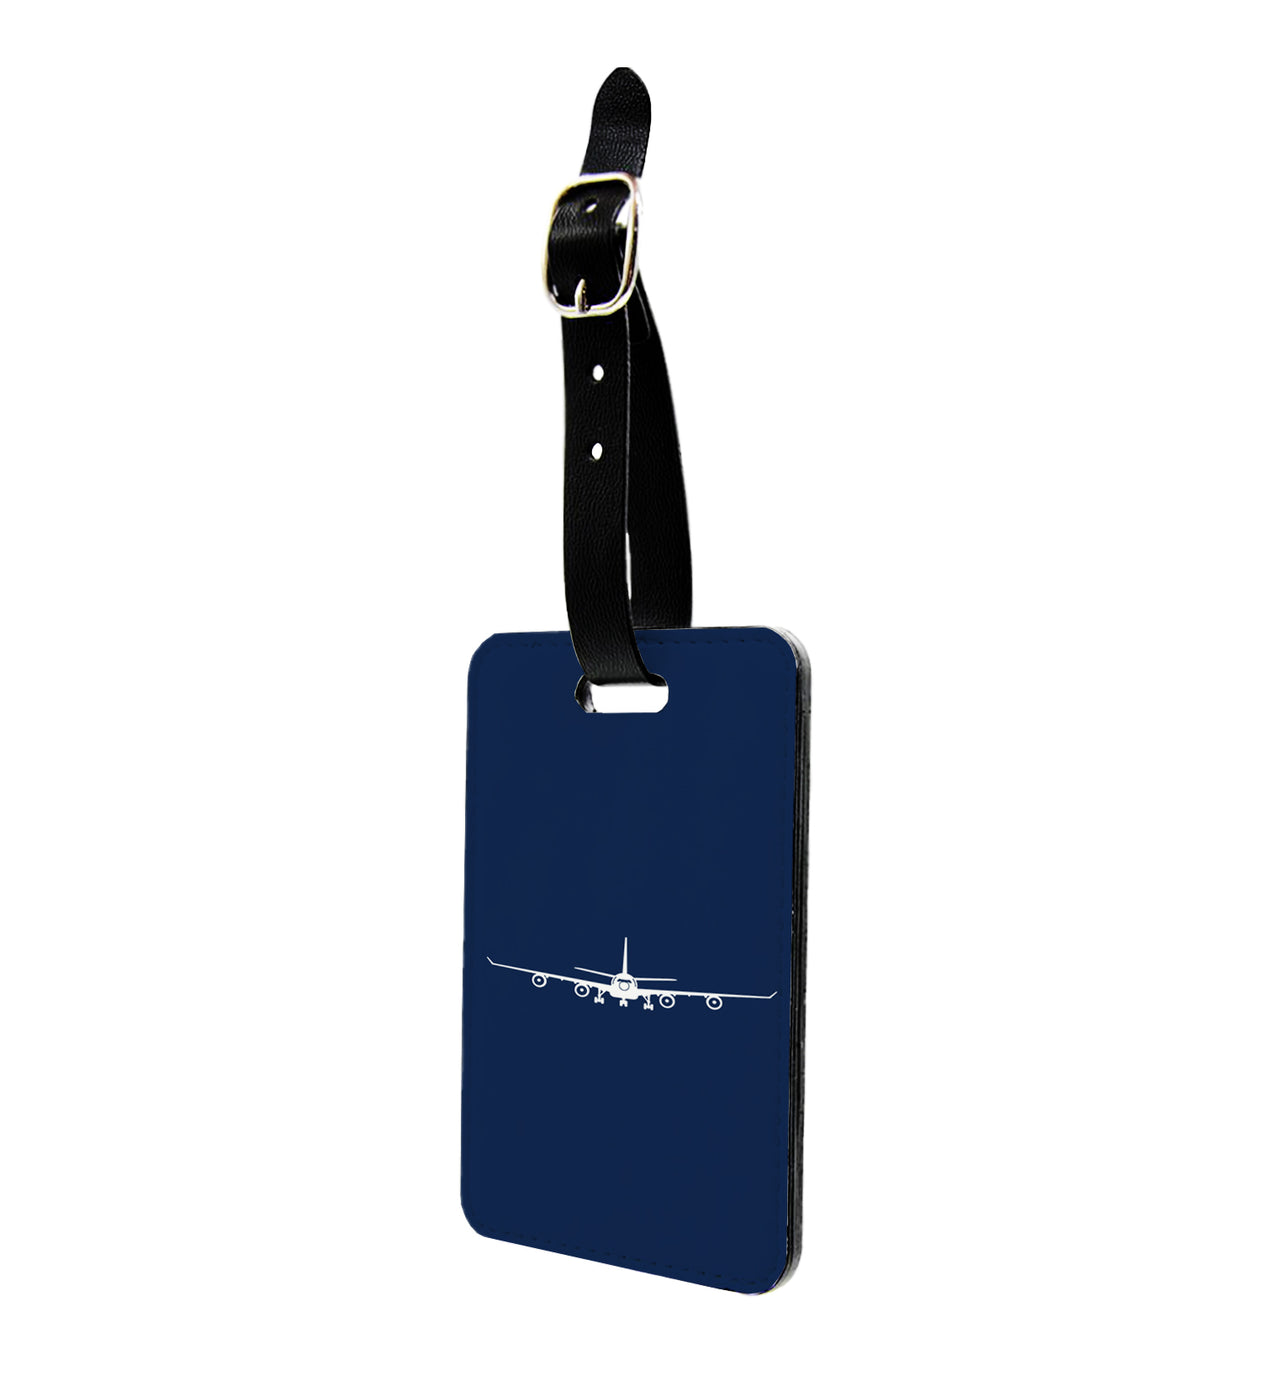 Airbus A340 Silhouette Designed Luggage Tag